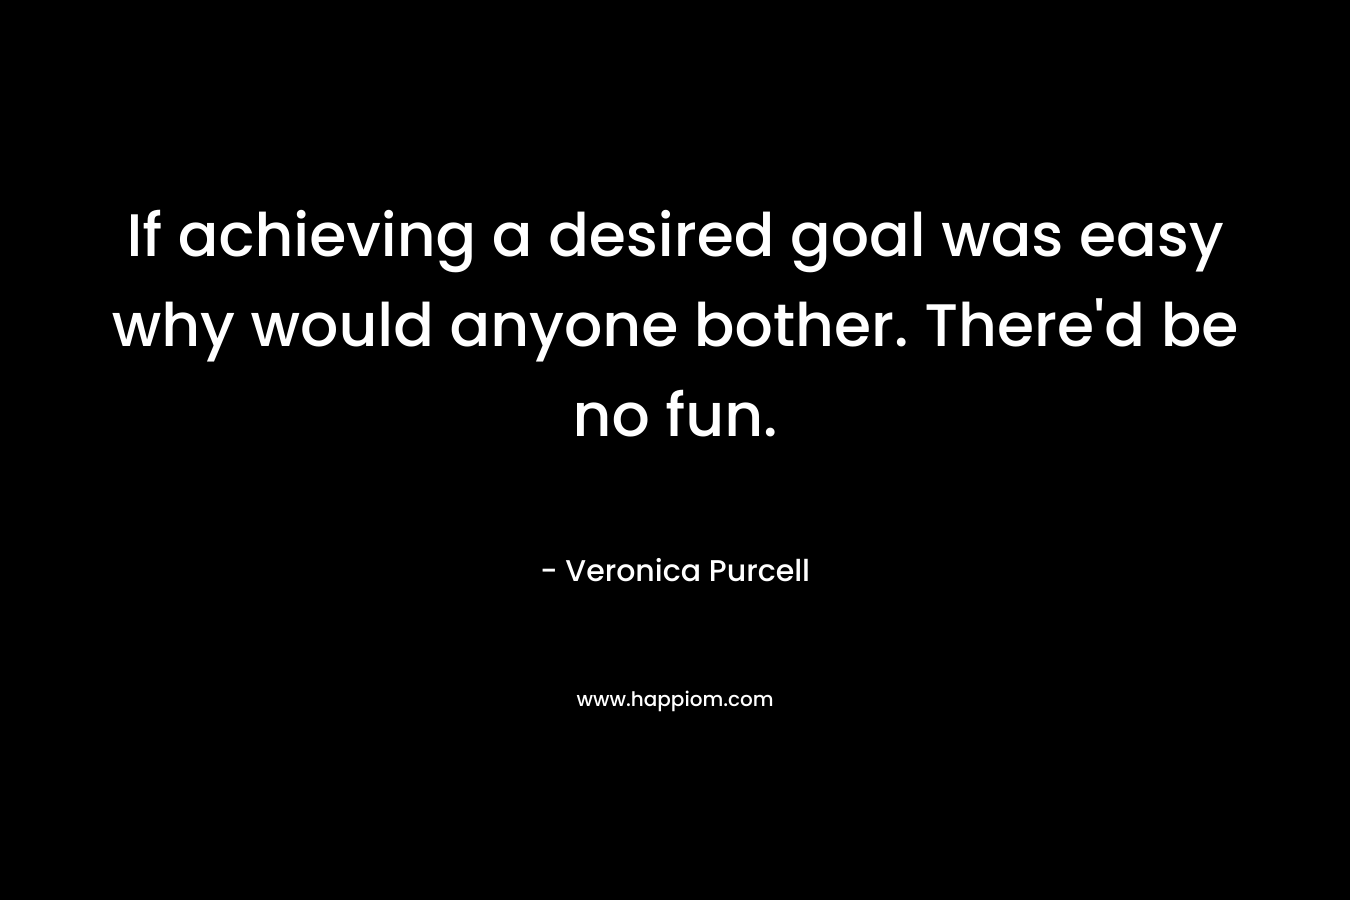 If achieving a desired goal was easy why would anyone bother. There’d be no fun. – Veronica Purcell